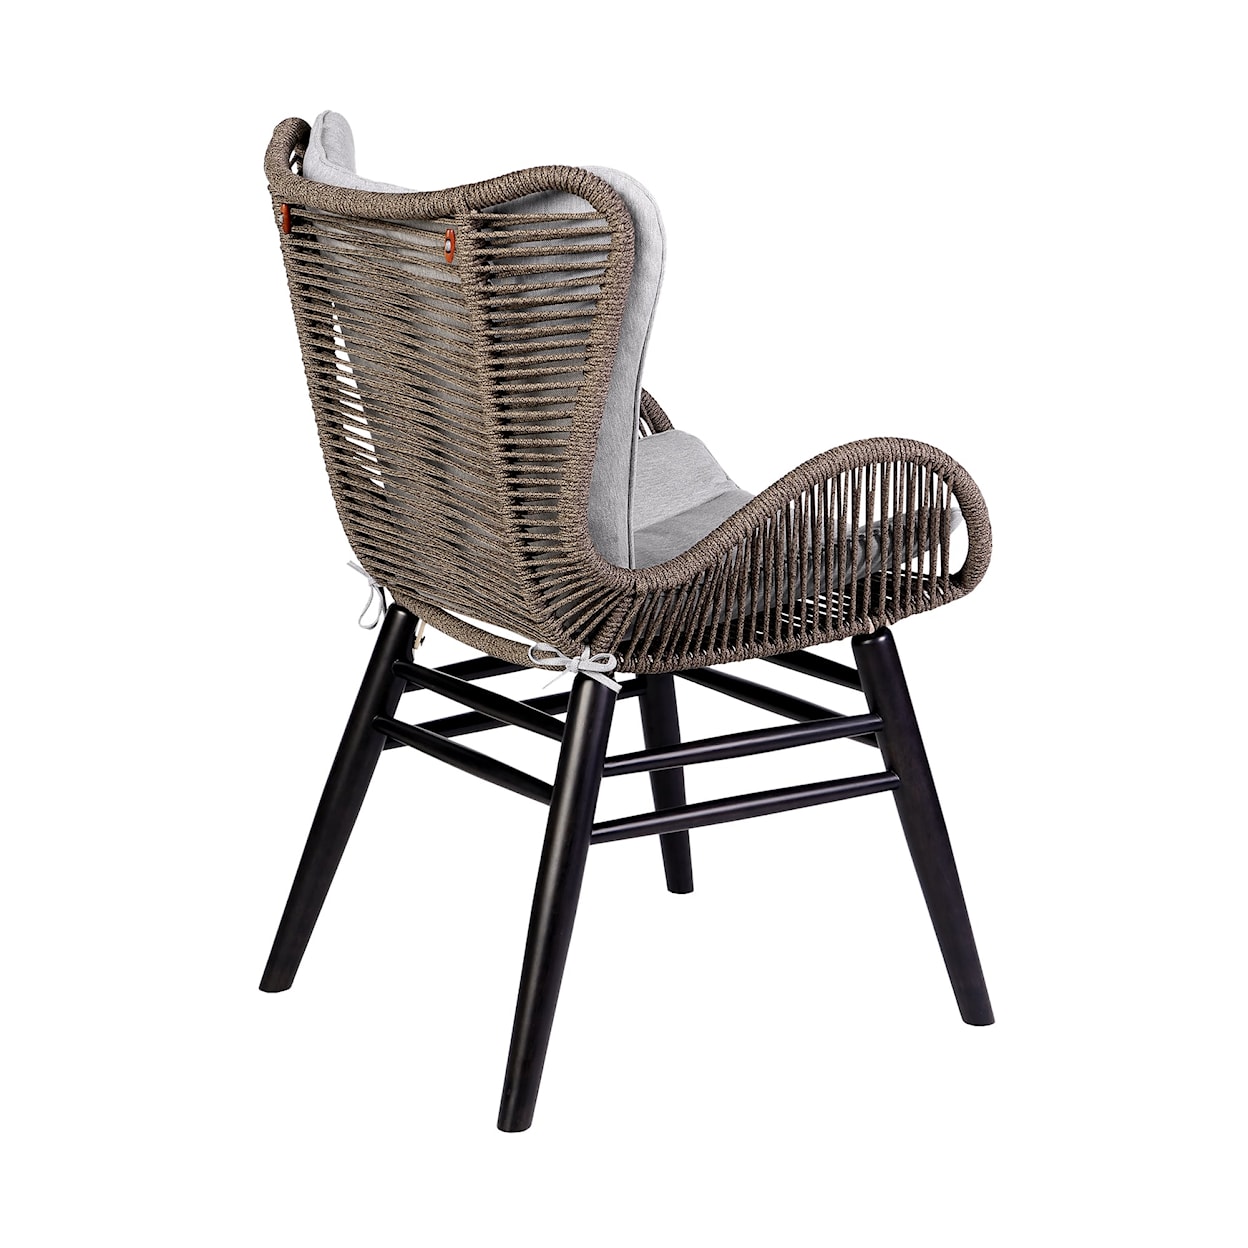 Armen Living Fanny Outdoor Dining Chair